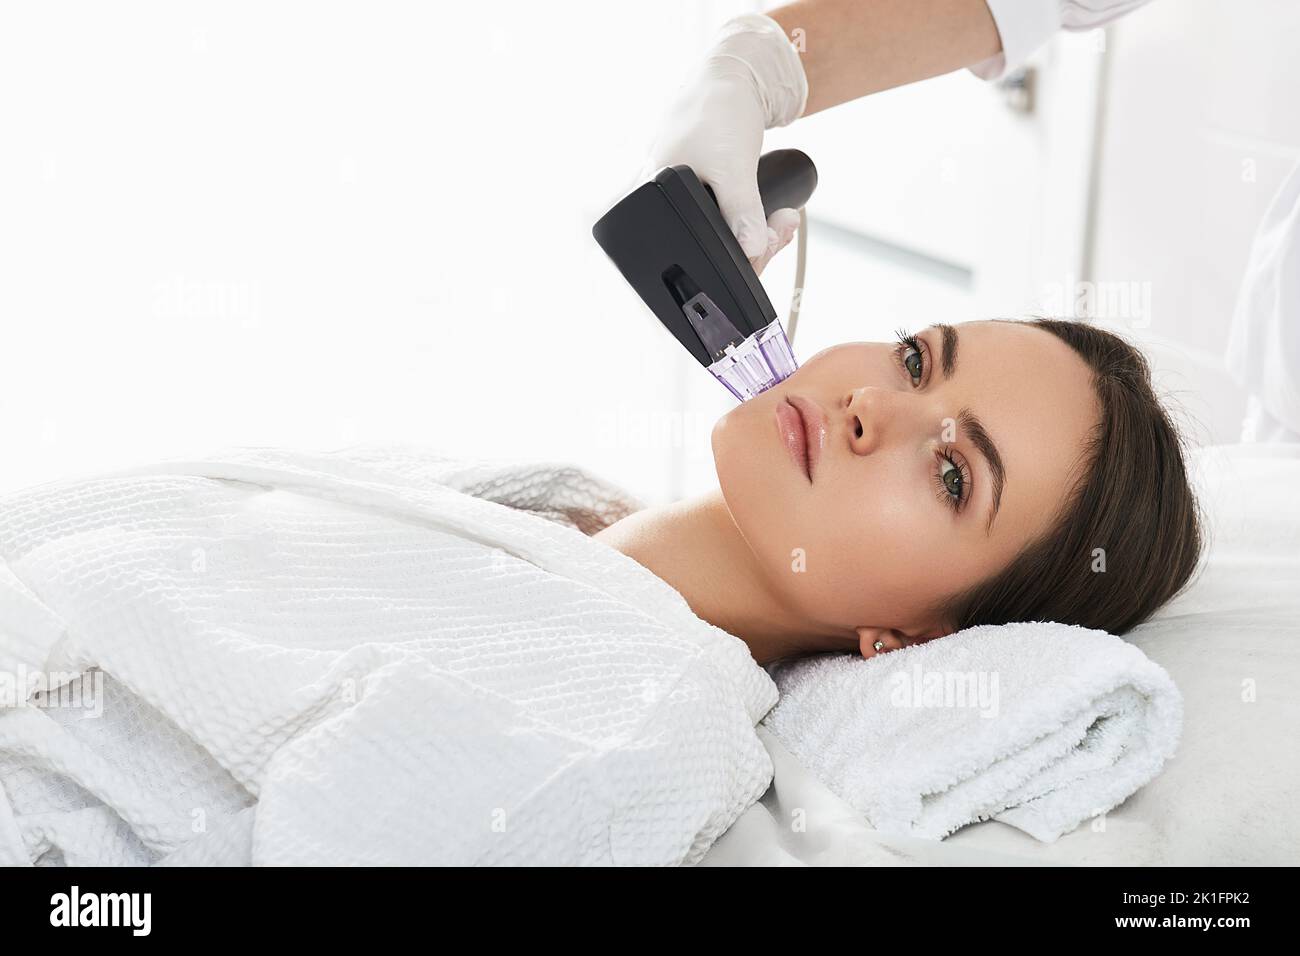 Woman while RF lifting procedure for her face skin tightening with cosmetologist at a beauty salon Stock Photo